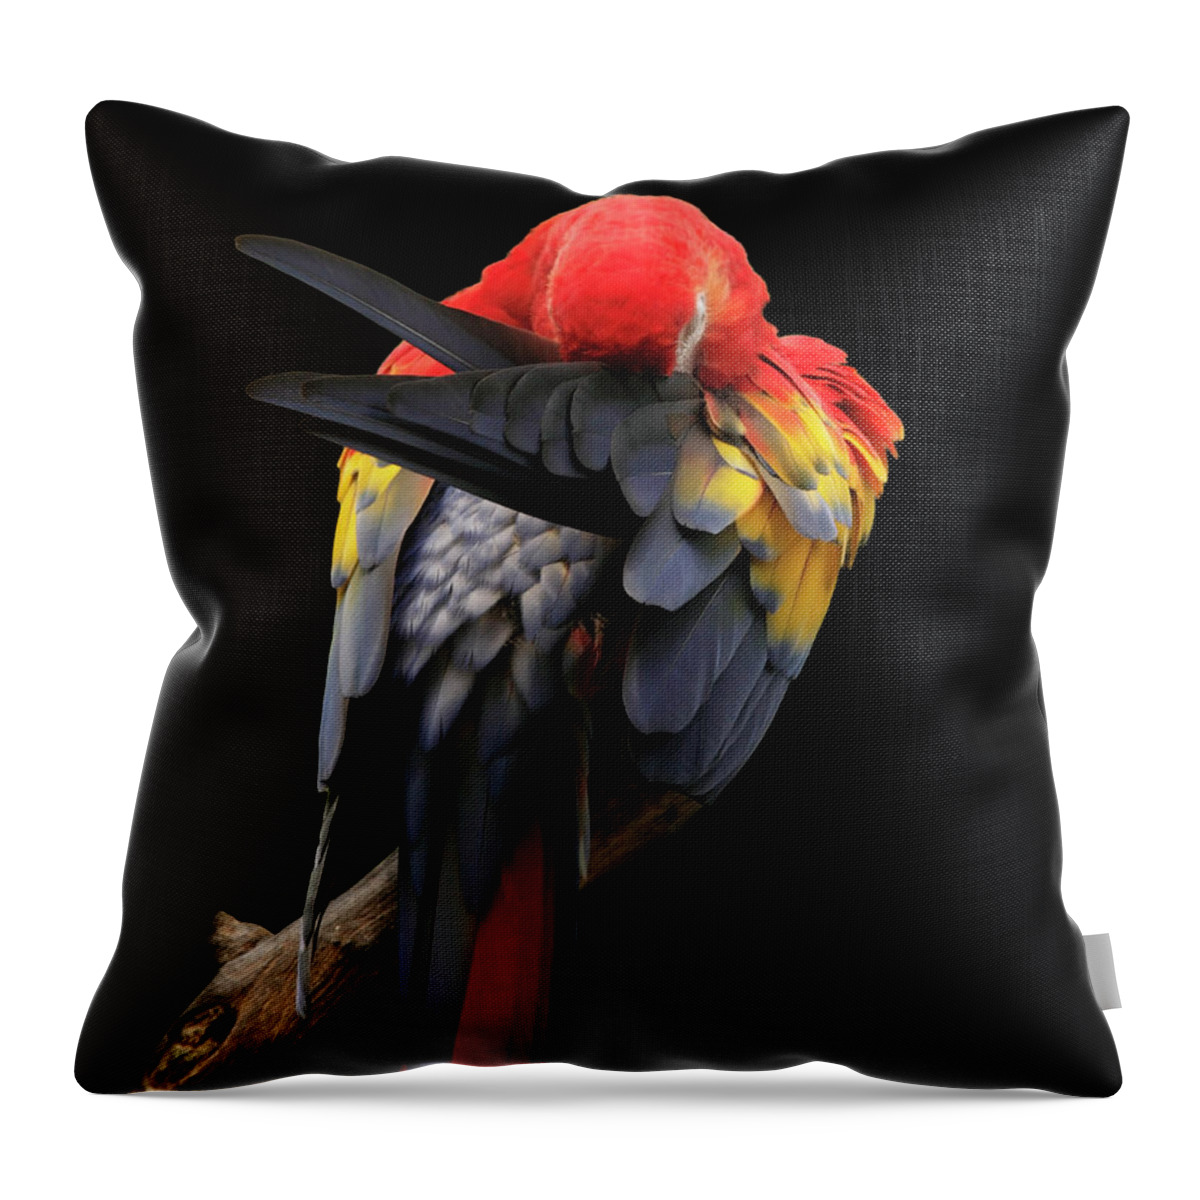 Animal Themes Throw Pillow featuring the photograph Scarlet Macaw by Paul Taylor